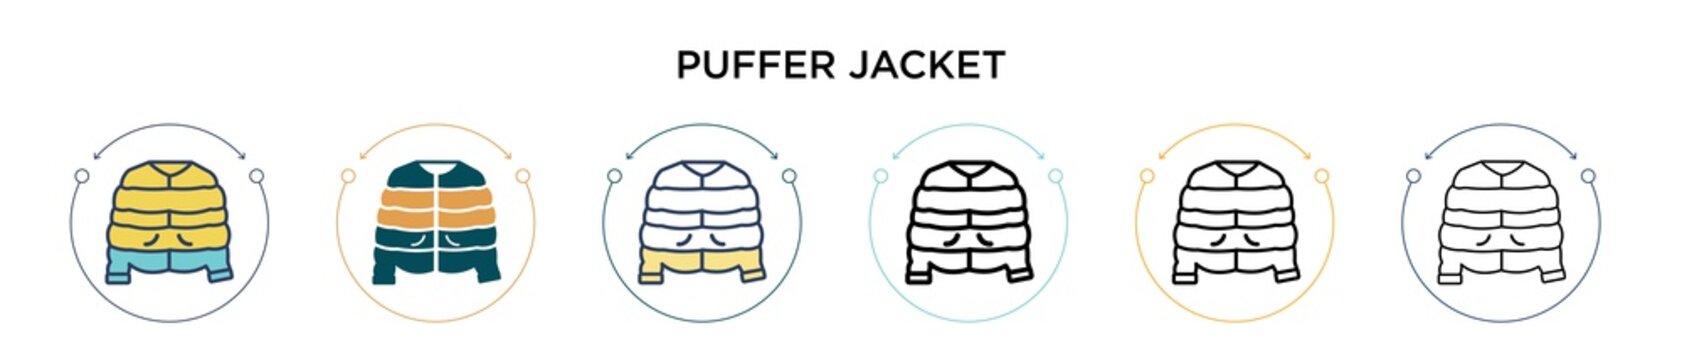 Puffer Jacket stock photos and royalty-free images, vectors and  illustrations | Adobe Stock